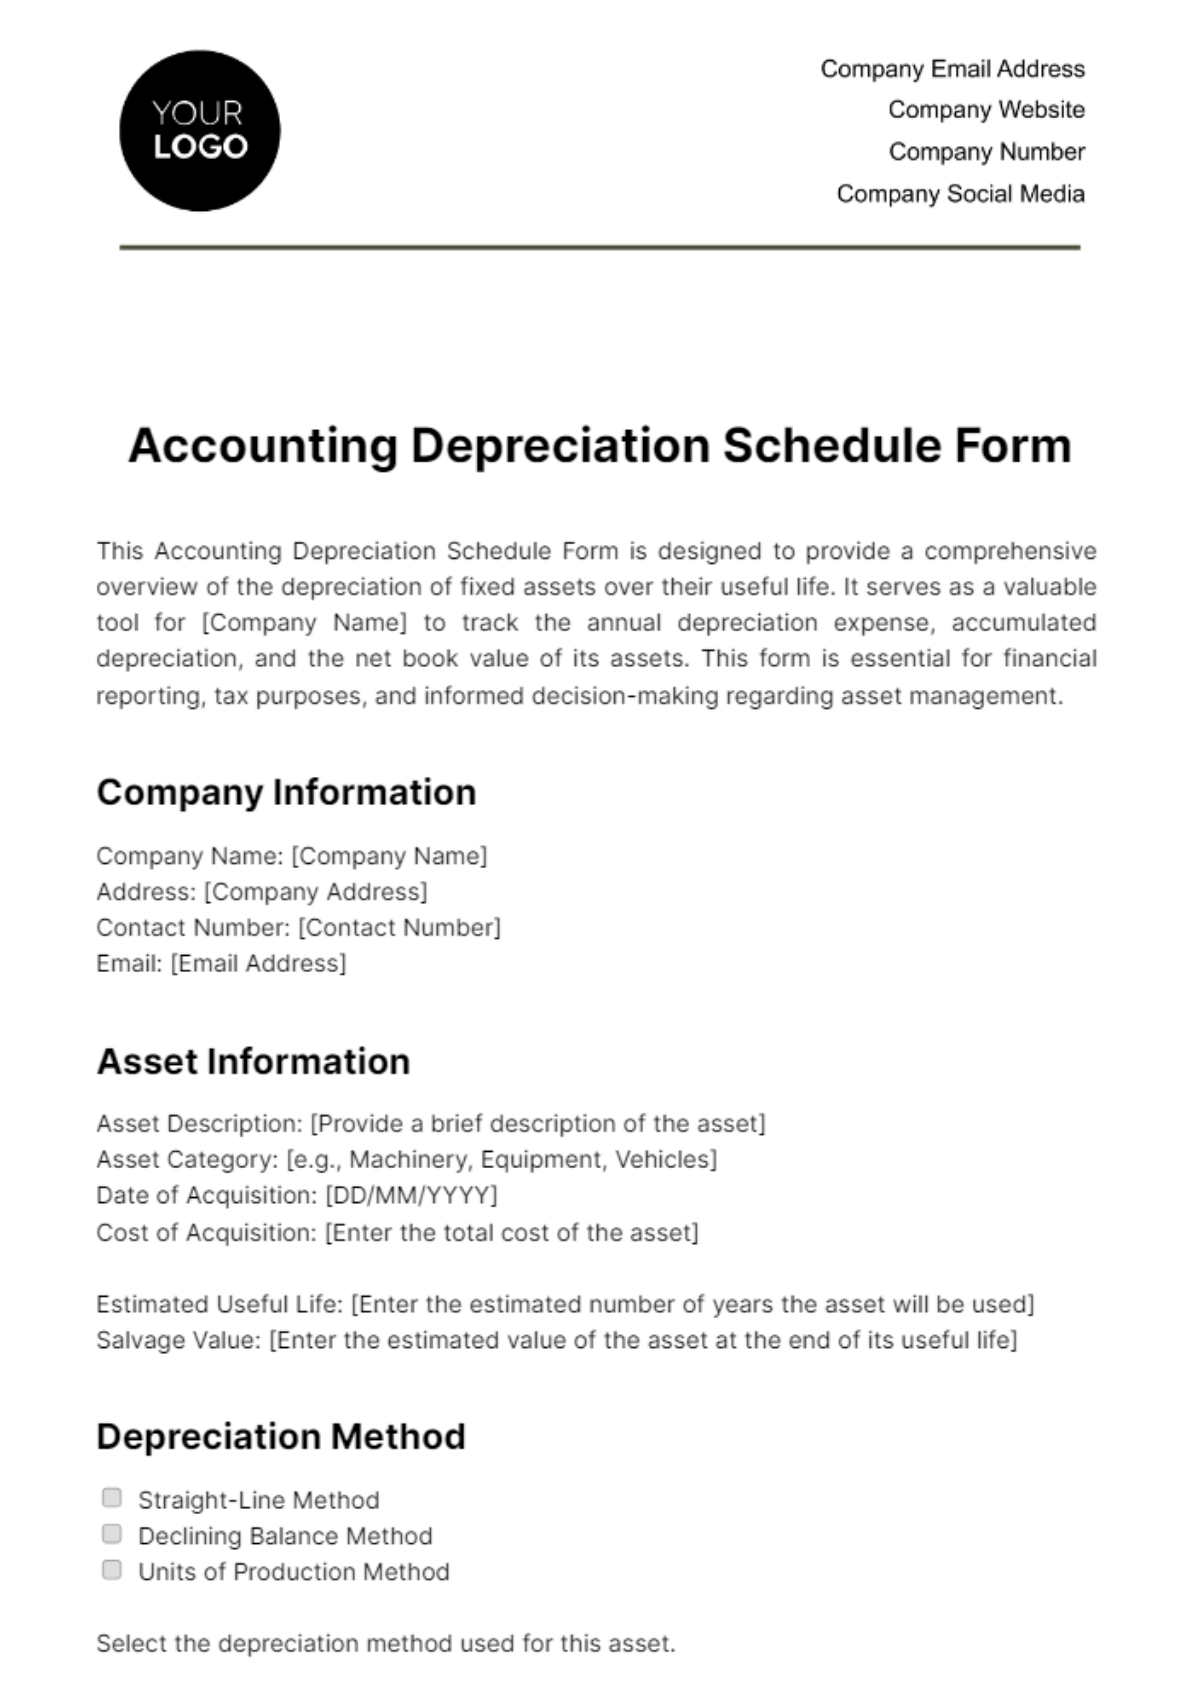 Free Accounting Depreciation Schedule Form Template